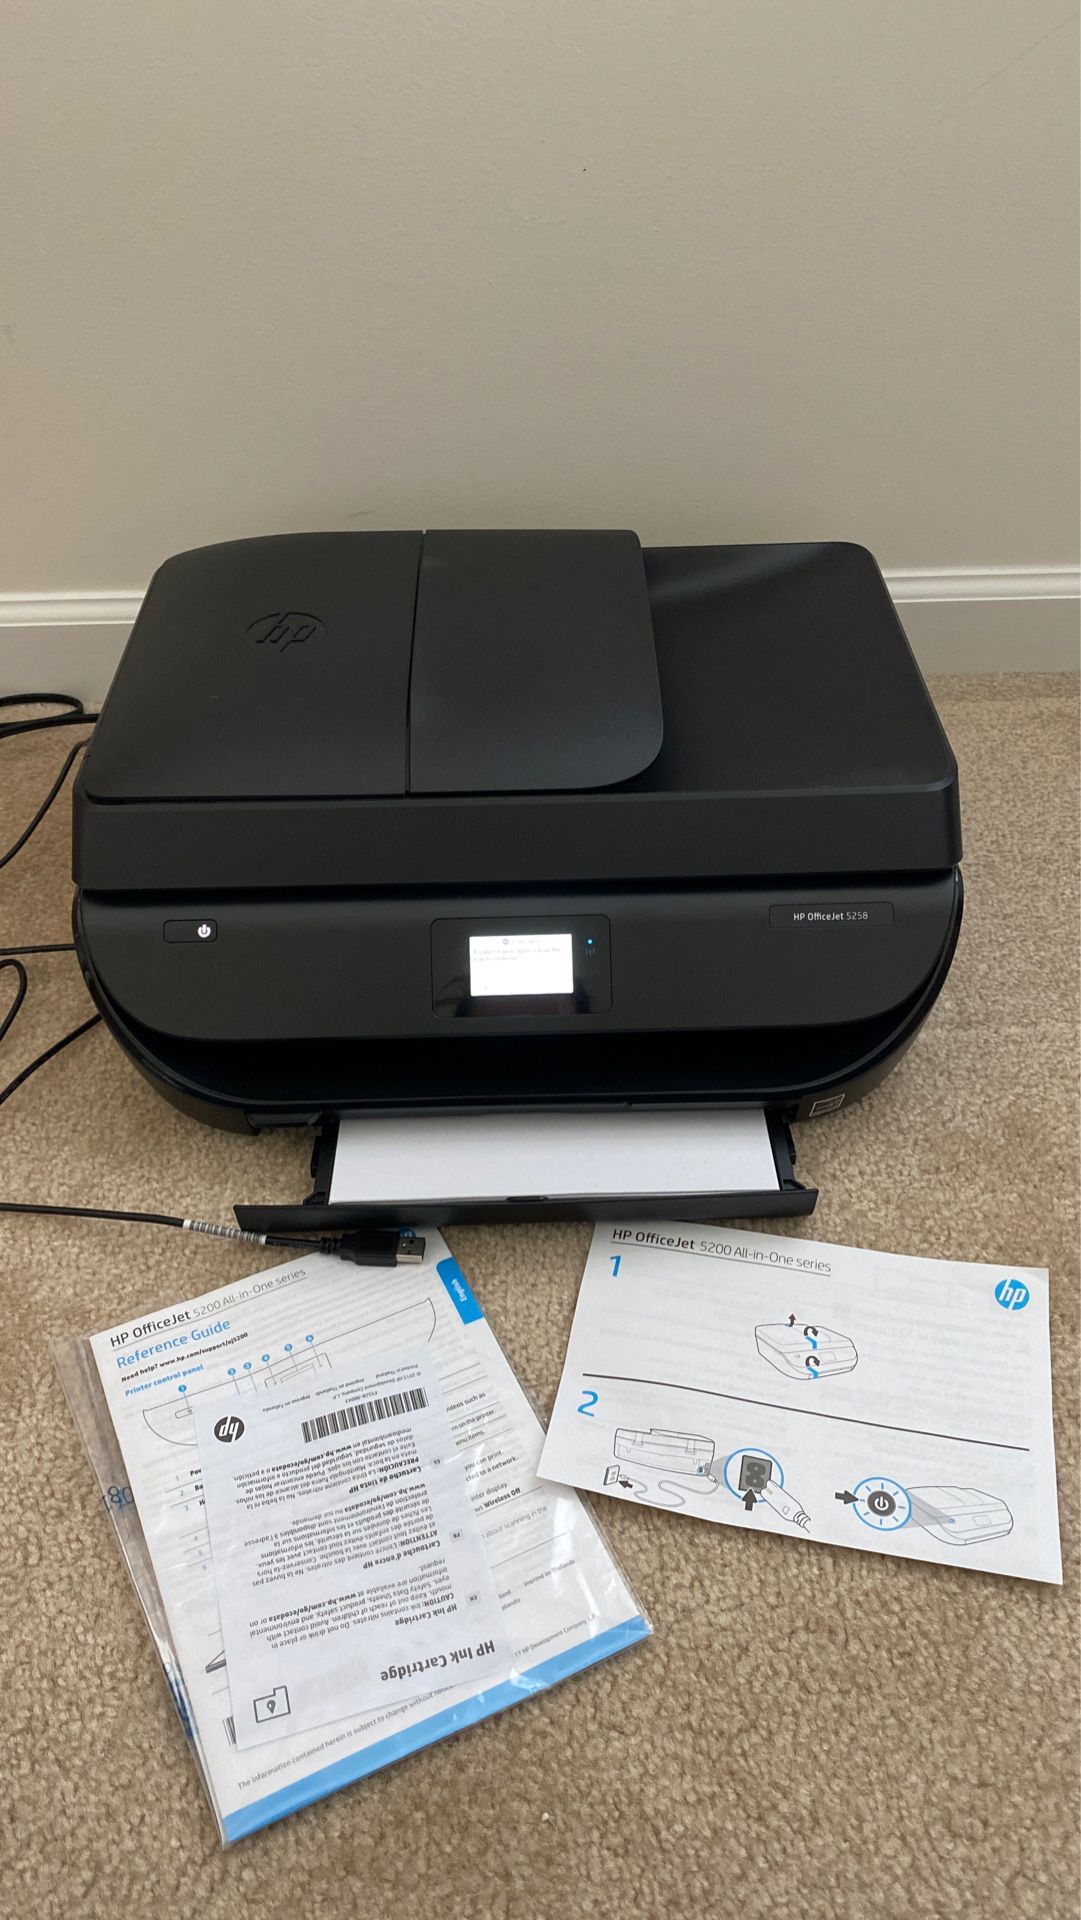 HP 5200 All-in-one Series Printer